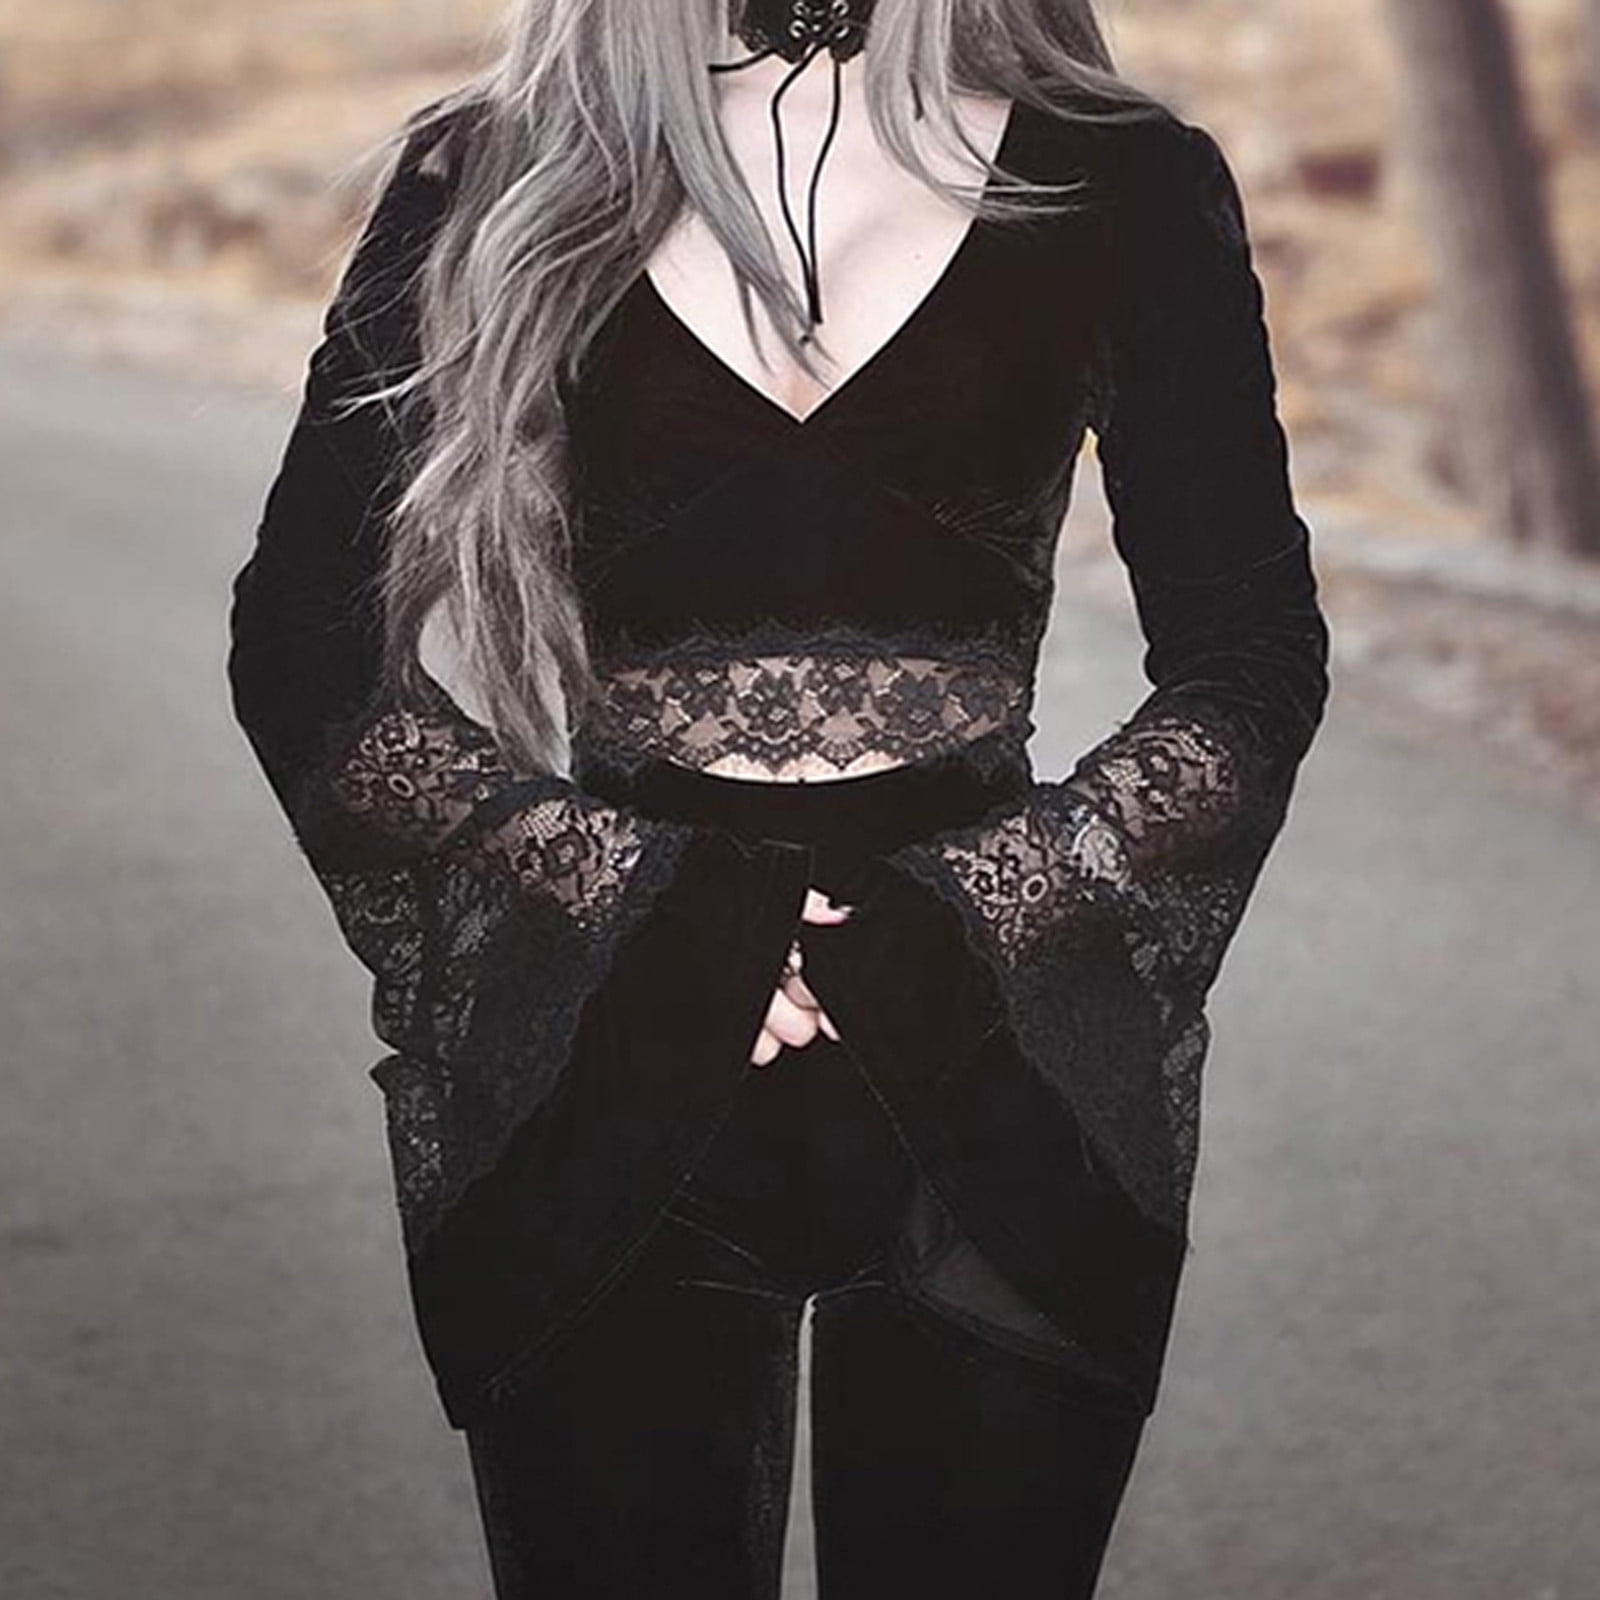 Goth T-shirts For Womens Sexy Gothic Retro Elegant Black Lace Long Sleeve  Hollow Top Shirt Gothic Clothes Футболка Женская @40 - T-shirts - AliExpress